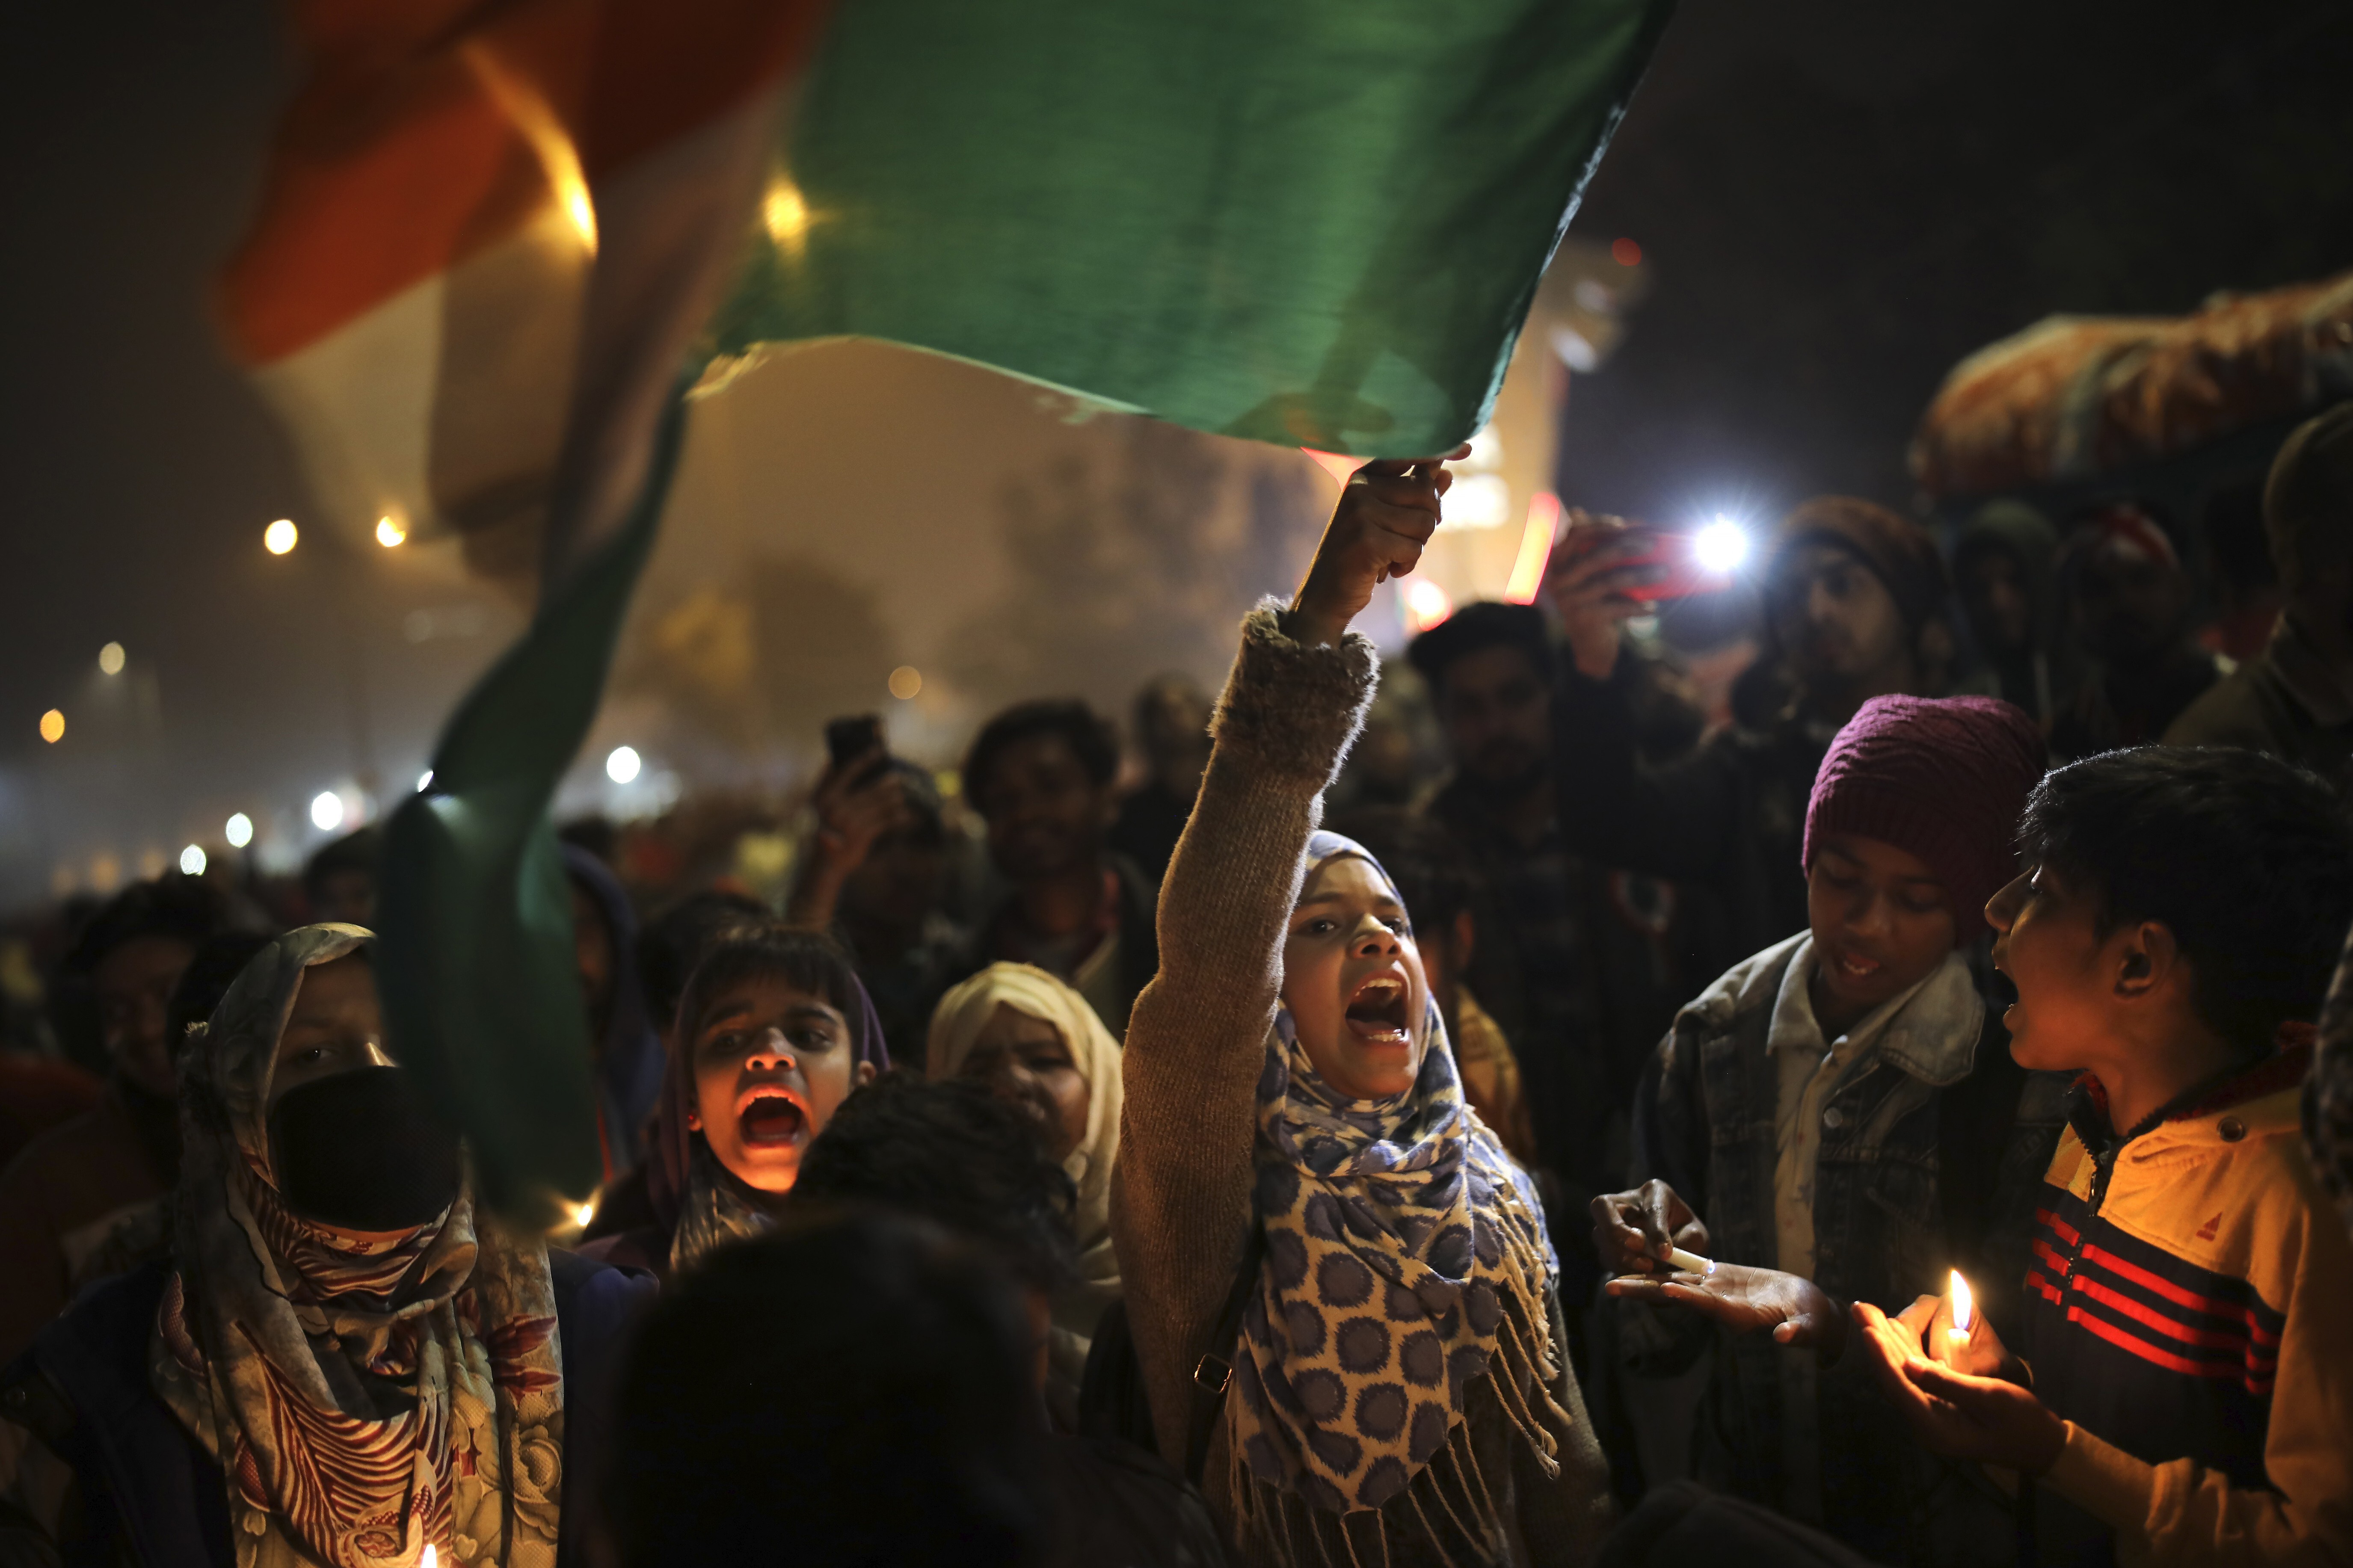 A girl waves the Indian flag as she shouts slogans at a protest site in the Shaheen Bagh neighbourhood of New Delhi on January 21. Photo: AP